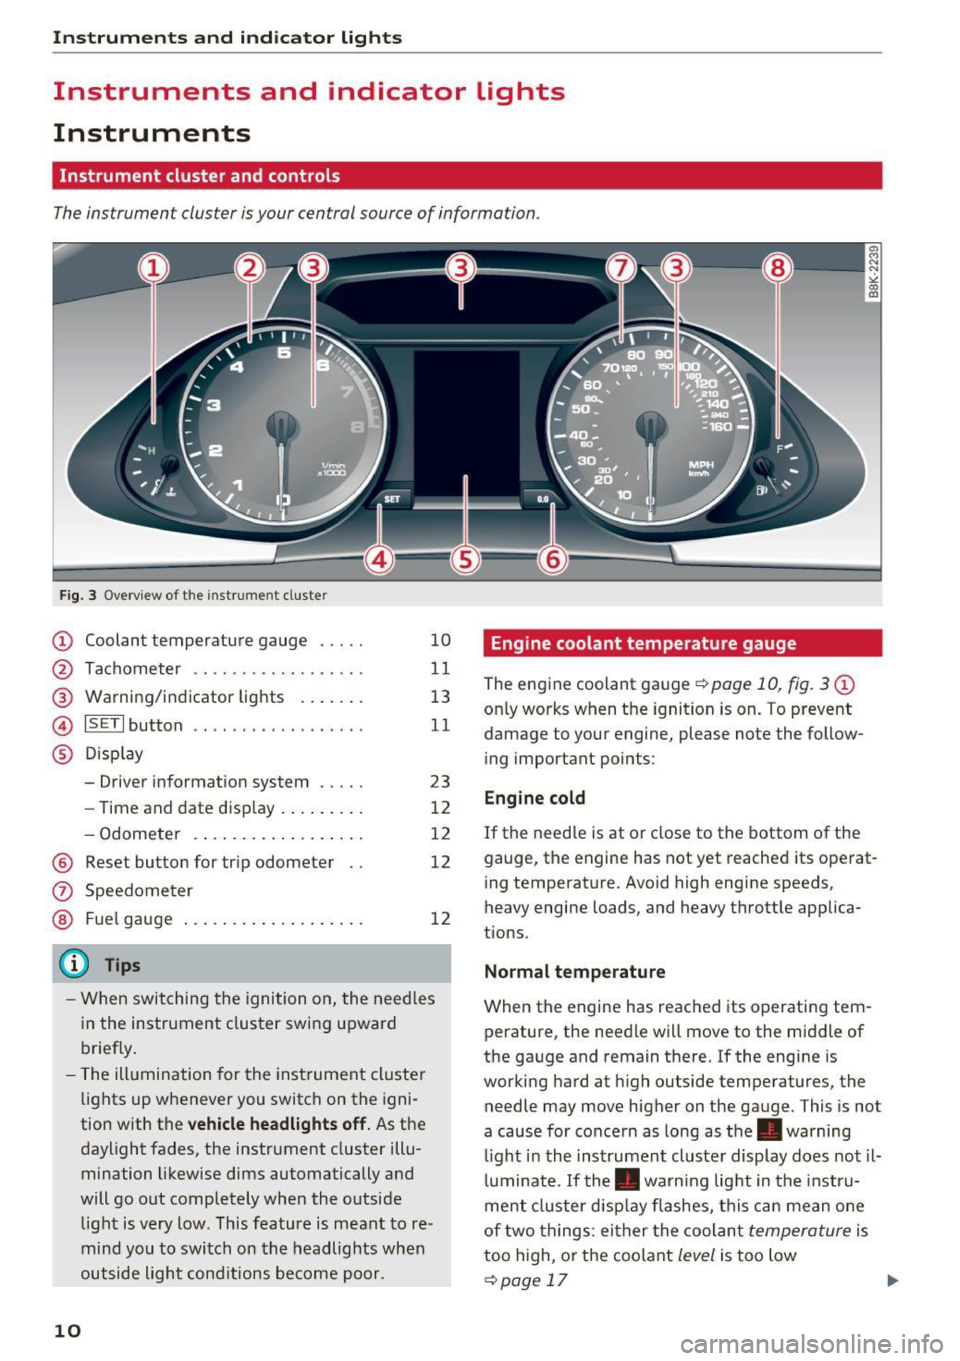 AUDI A4 2016 User Guide Instruments  and  indicator  lights 
Instruments  and  indicator  Lights 
Instruments 
Instrument  cluster  and controls 
The instrument  cluster  is your  central source  of  information. 
Fig.  3 Ov